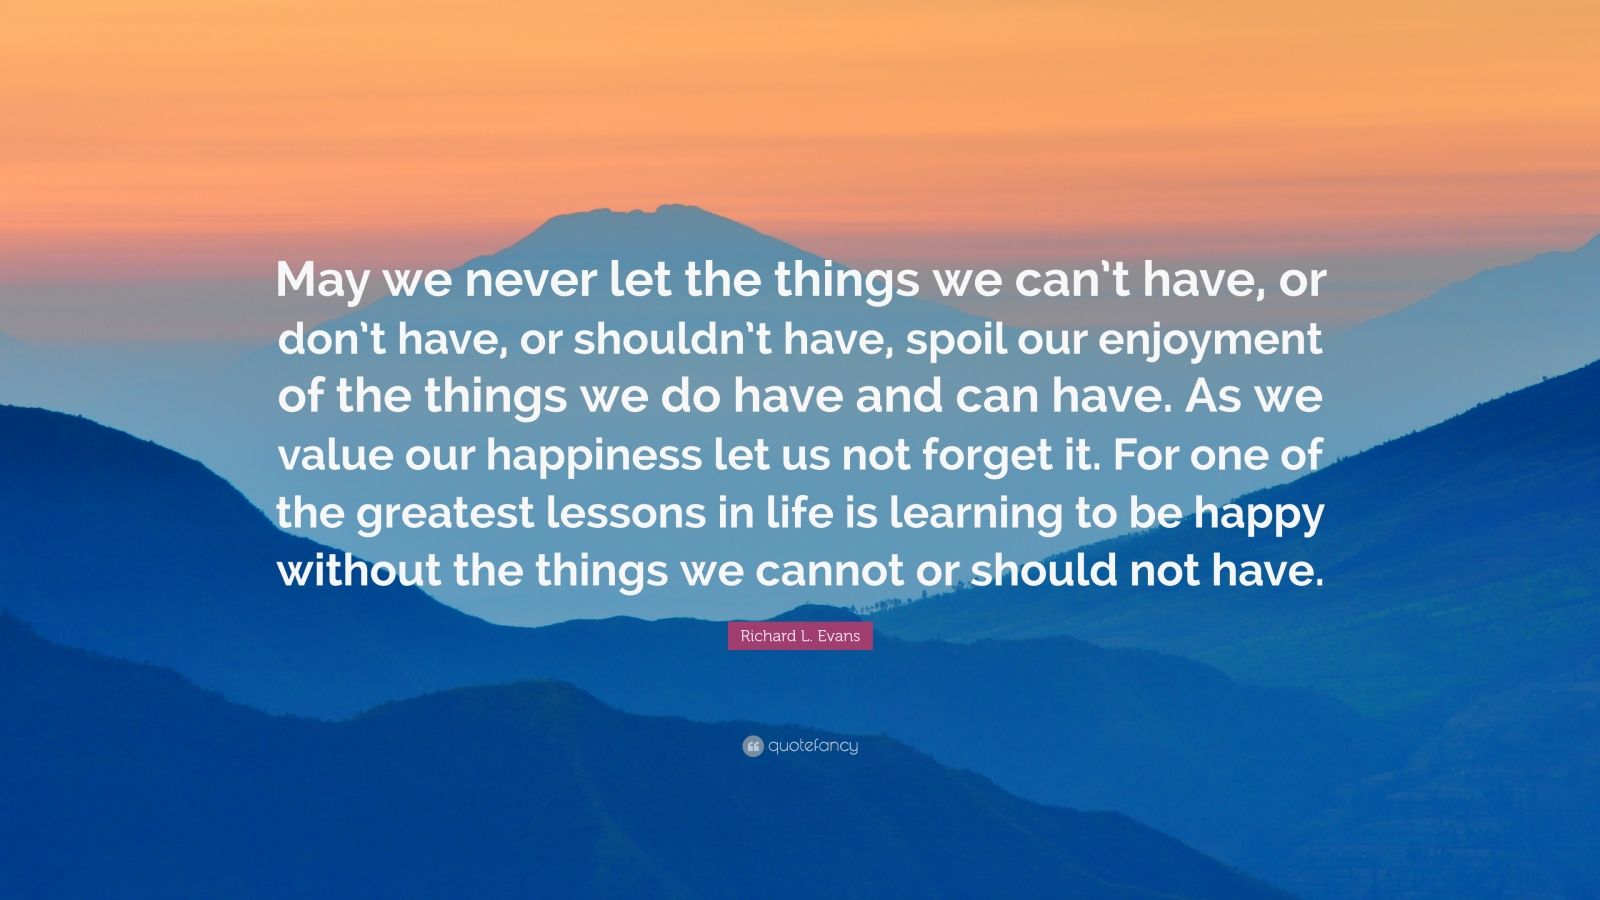 Richard L. Evans Quote: “May we never let the things we can’t have, or ...